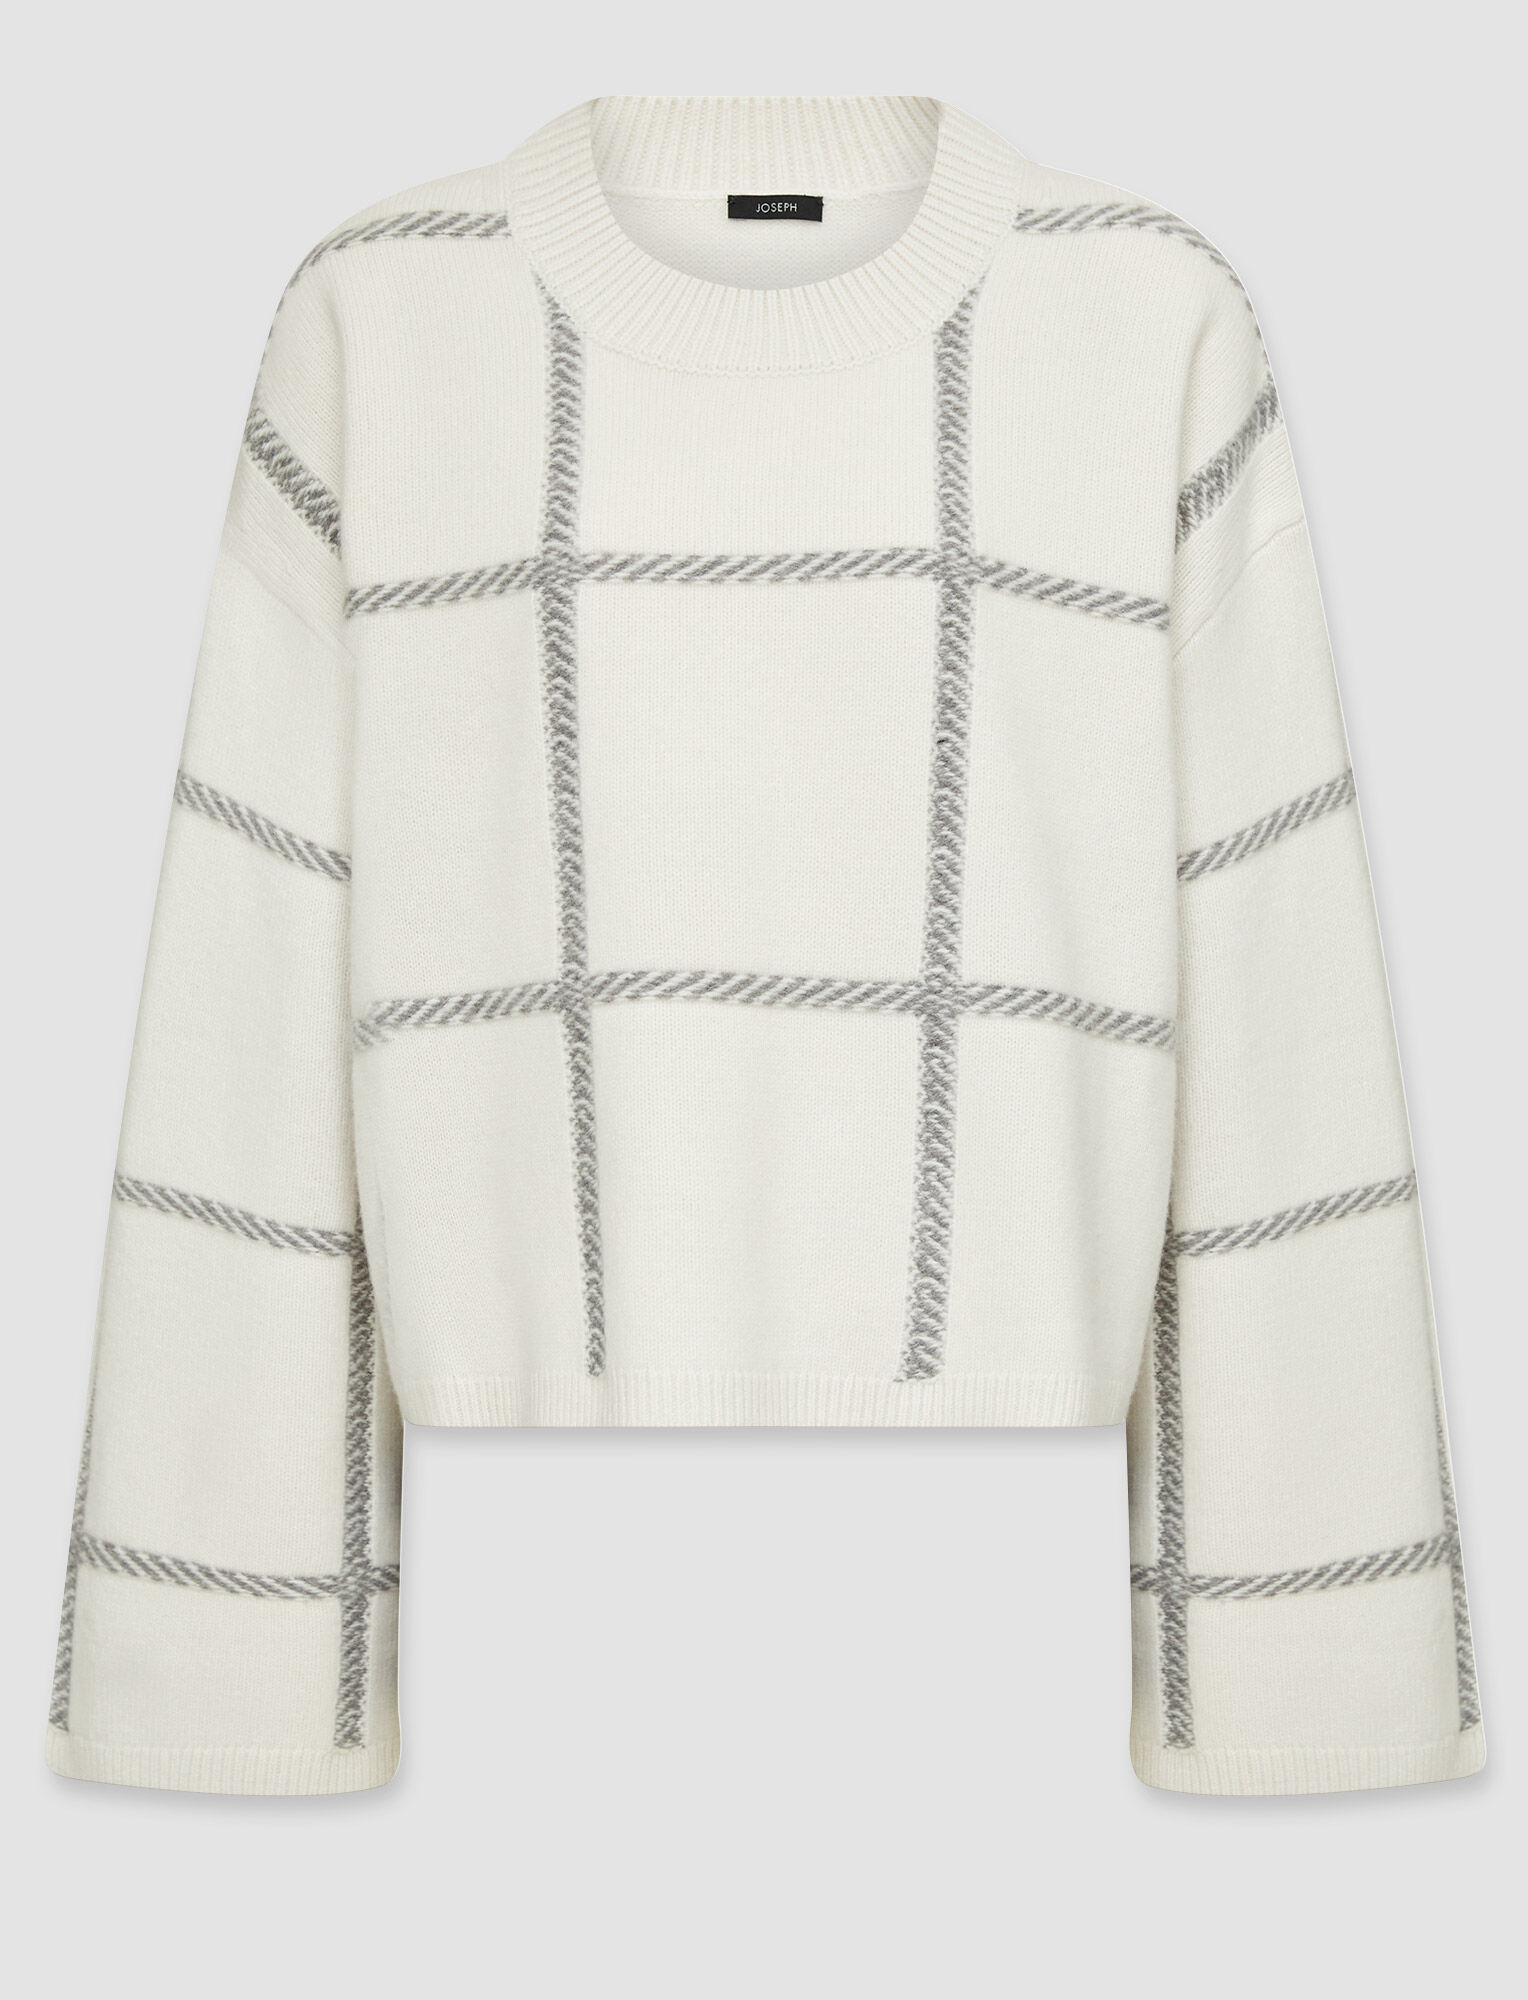 Joseph, Check Knit Jumper, in Ivory Combo